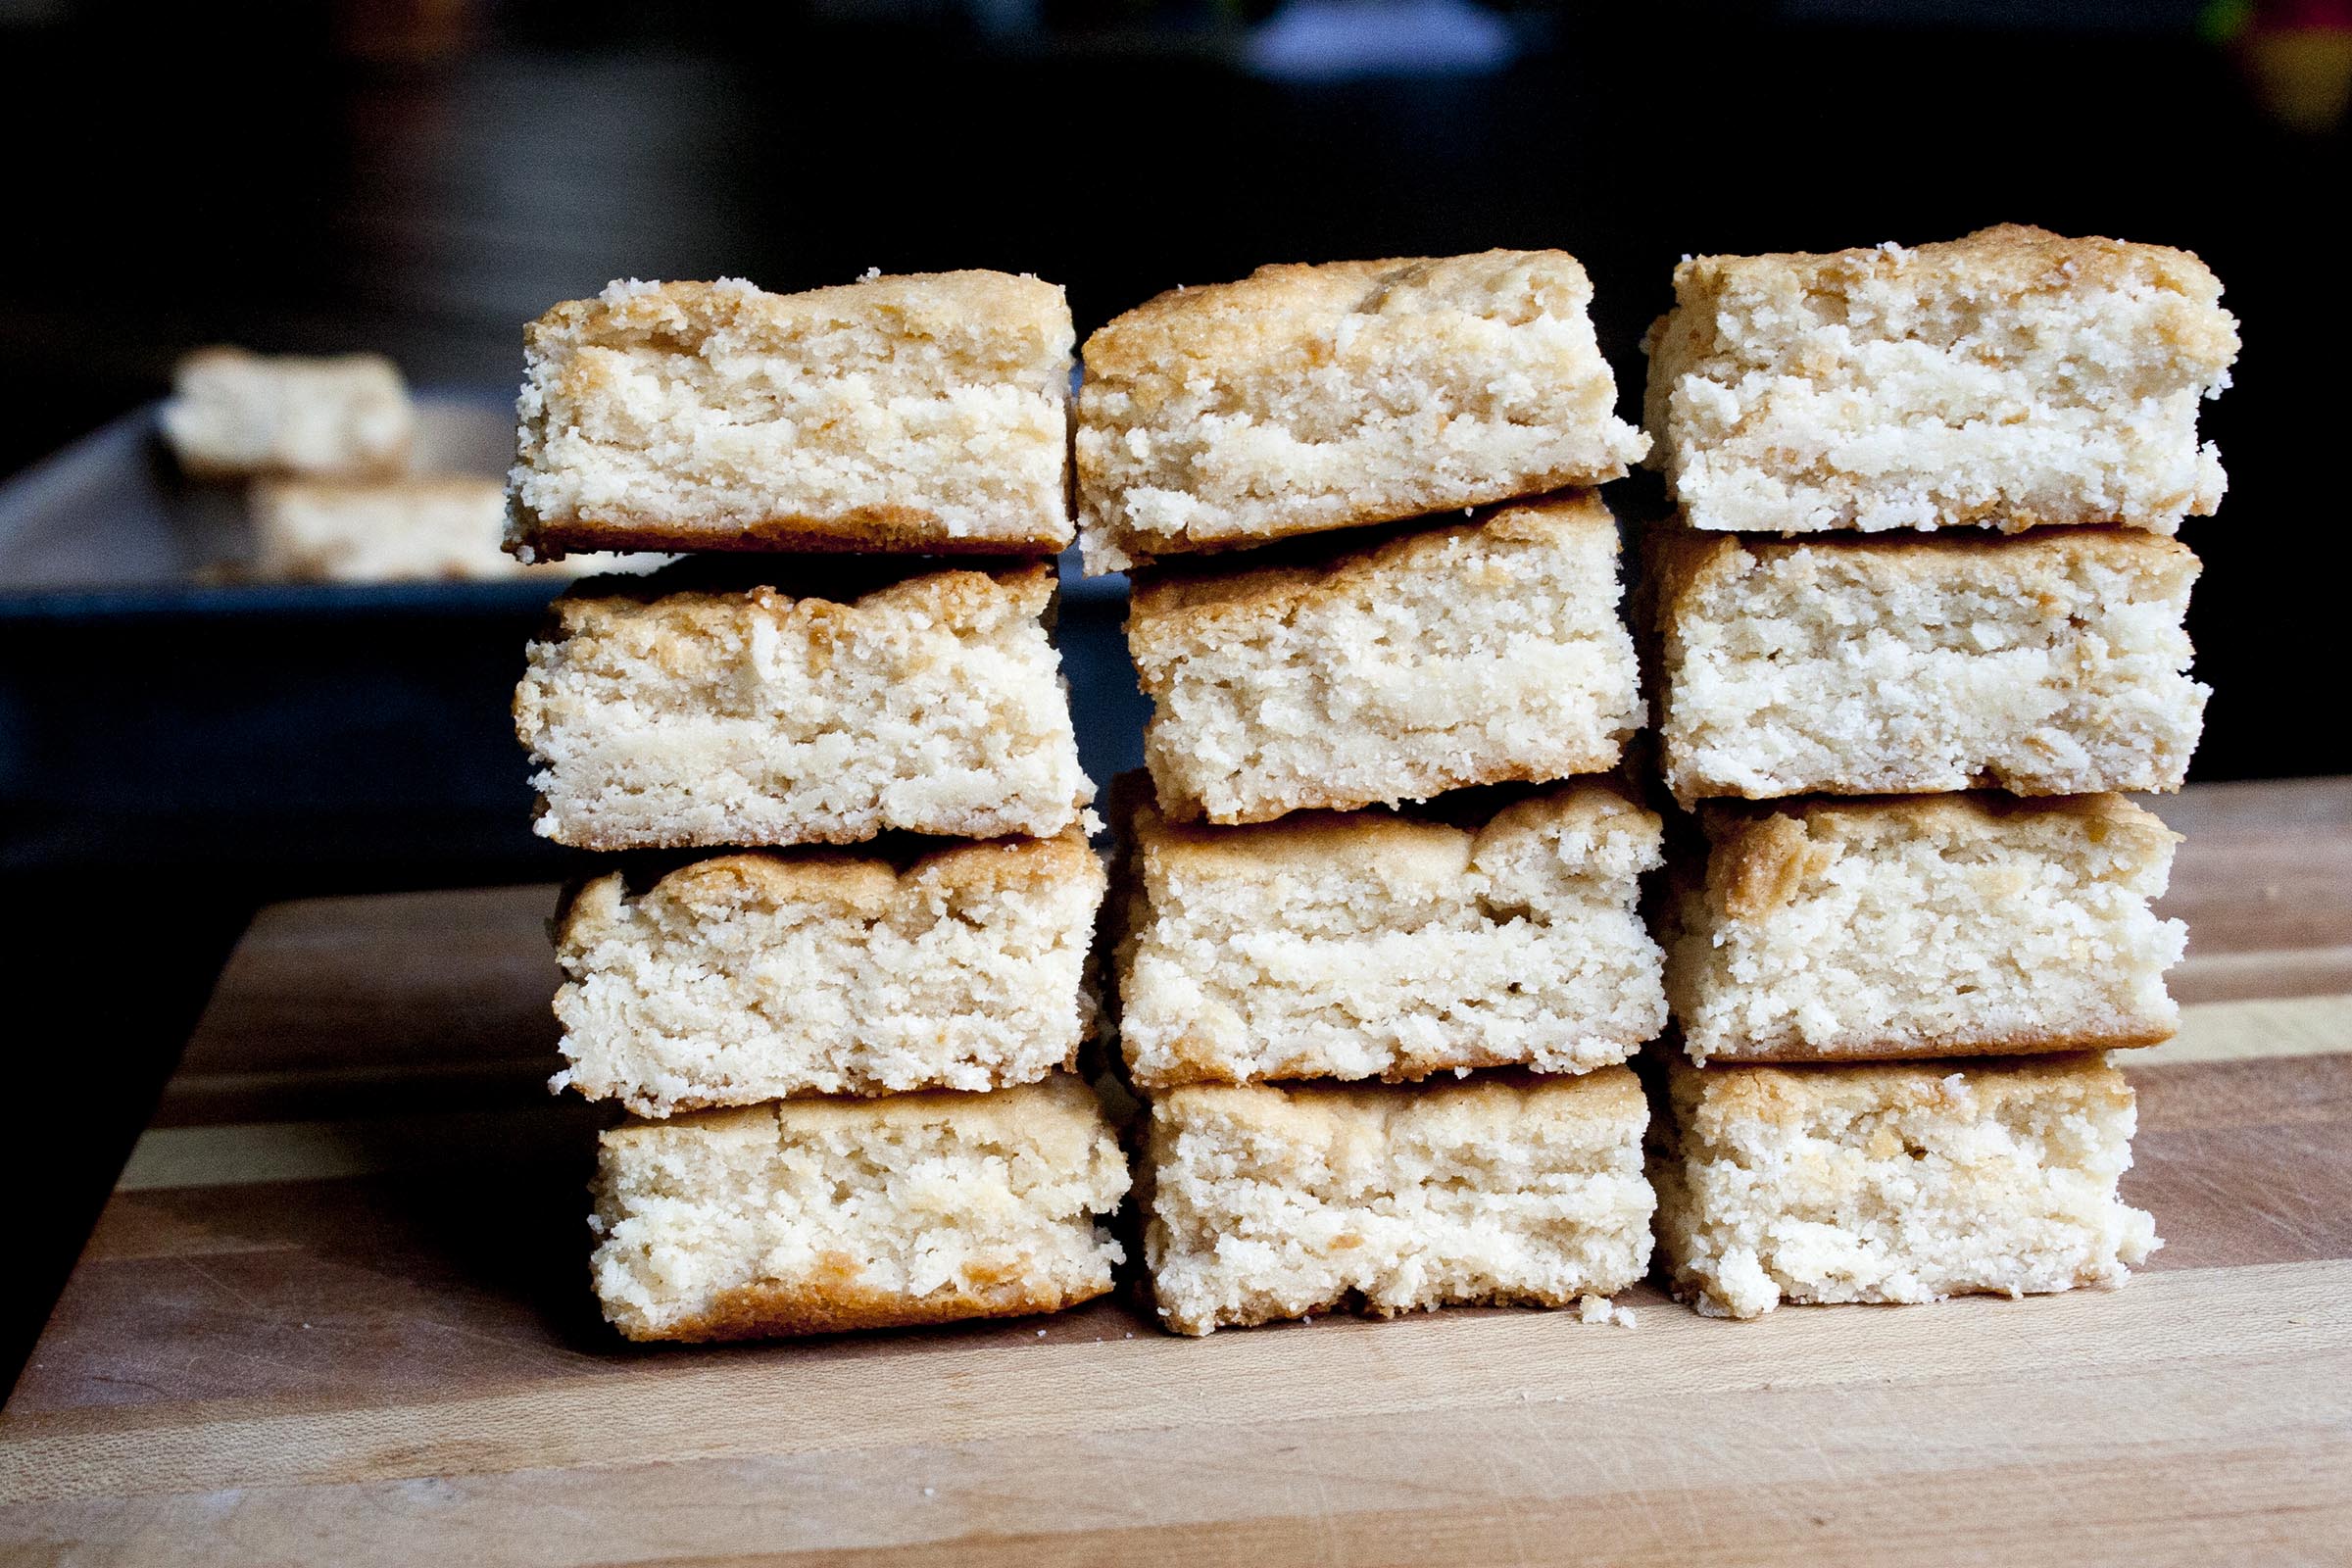 Triple Coconut Bars made from Coconut Oil, Coconut Extract and Coconut Flour. Chewy, rich and intensely coconutty (and they just happen to be gluten-free). I lifeaswecookit.com